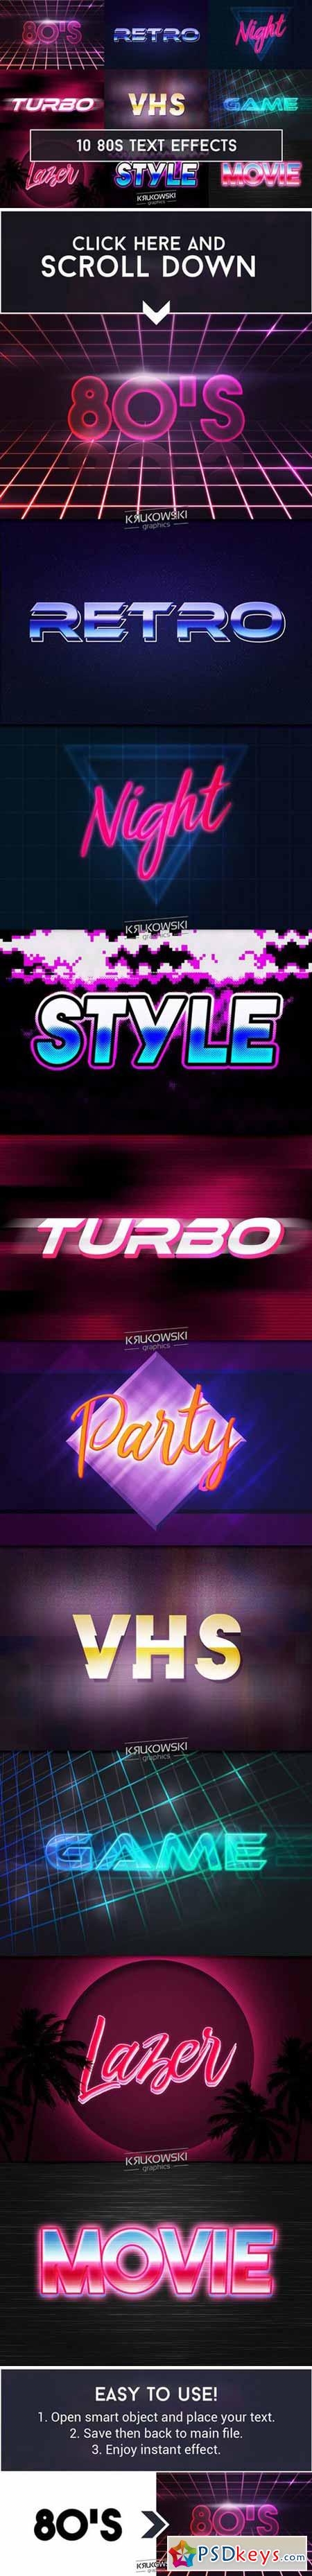 Download 80's Retro Text Effect Mockup 796840 » Free Download ... PSD Mockup Templates